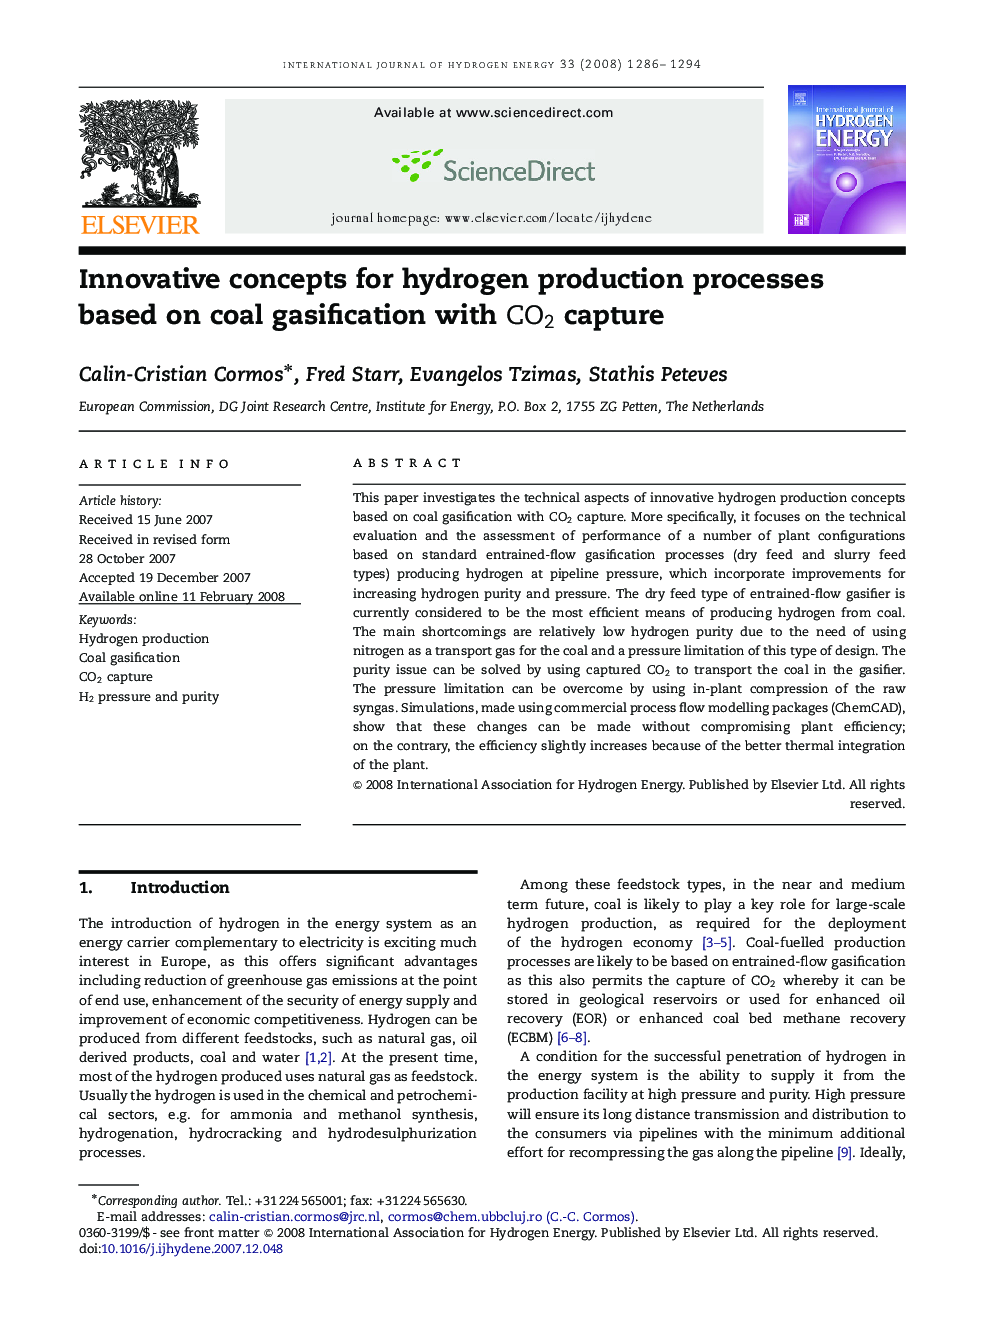 Innovative concepts for hydrogen production processes based on coal gasification with CO2CO2 capture